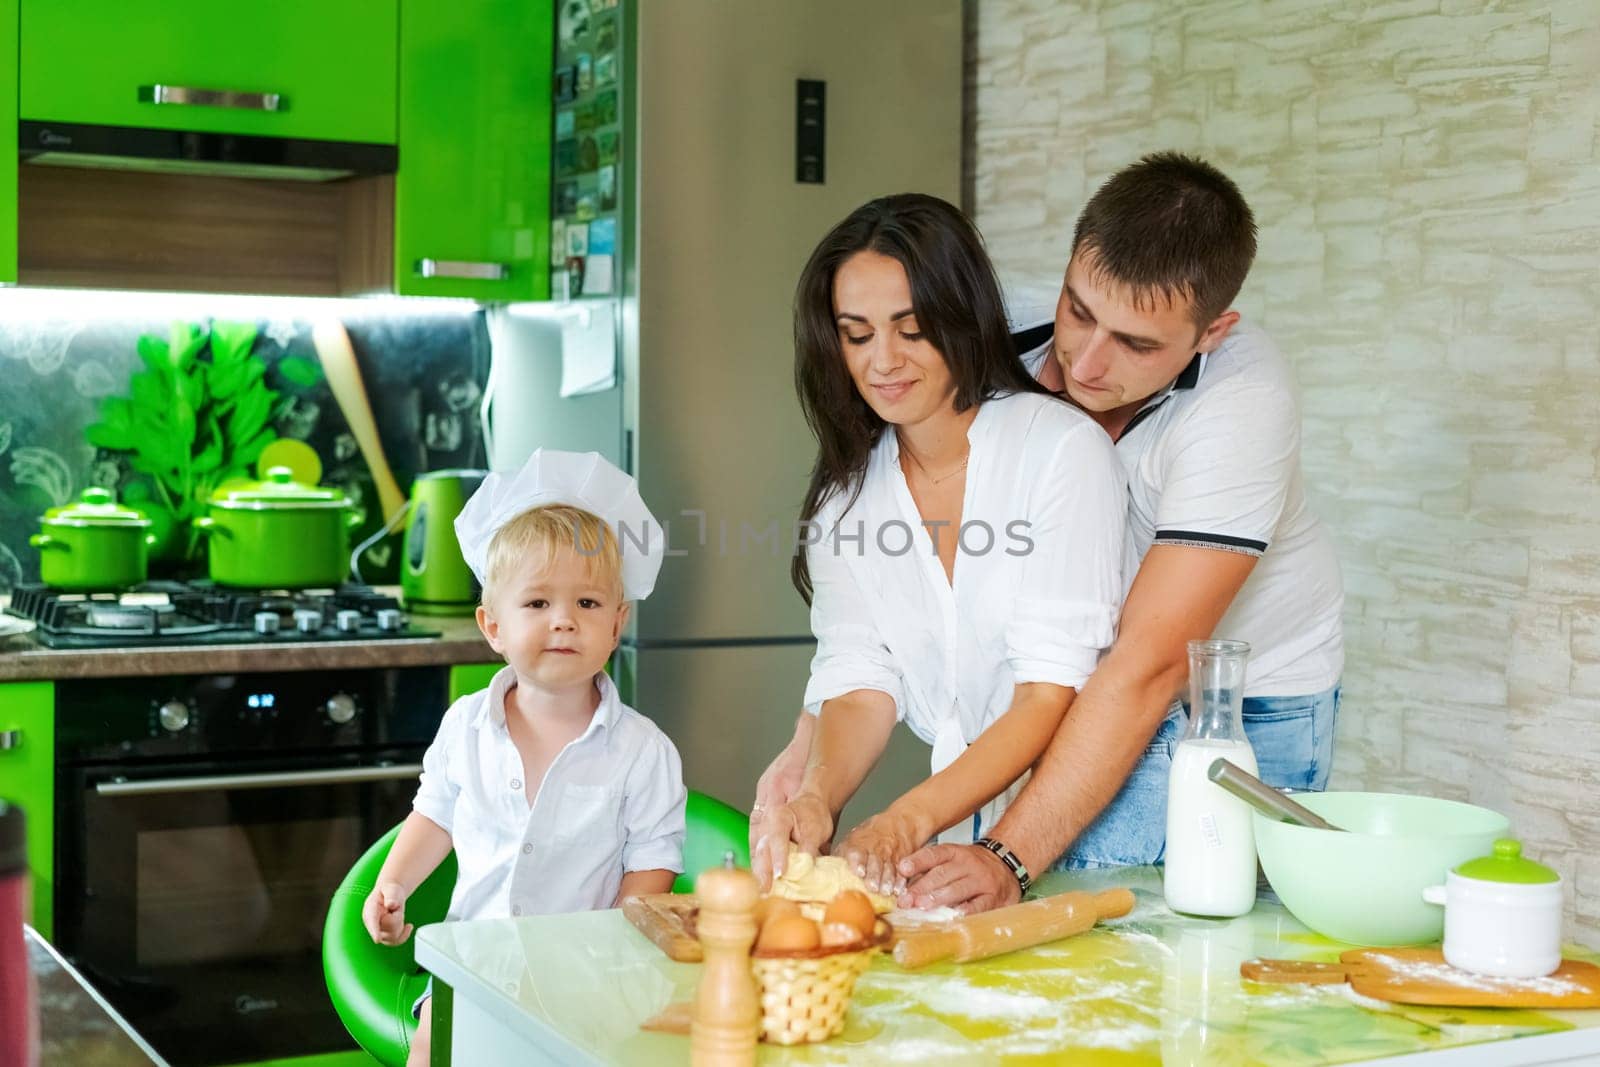 happy family mom and little son and dad are preparing dough in kitchen at table. products for dough are on table